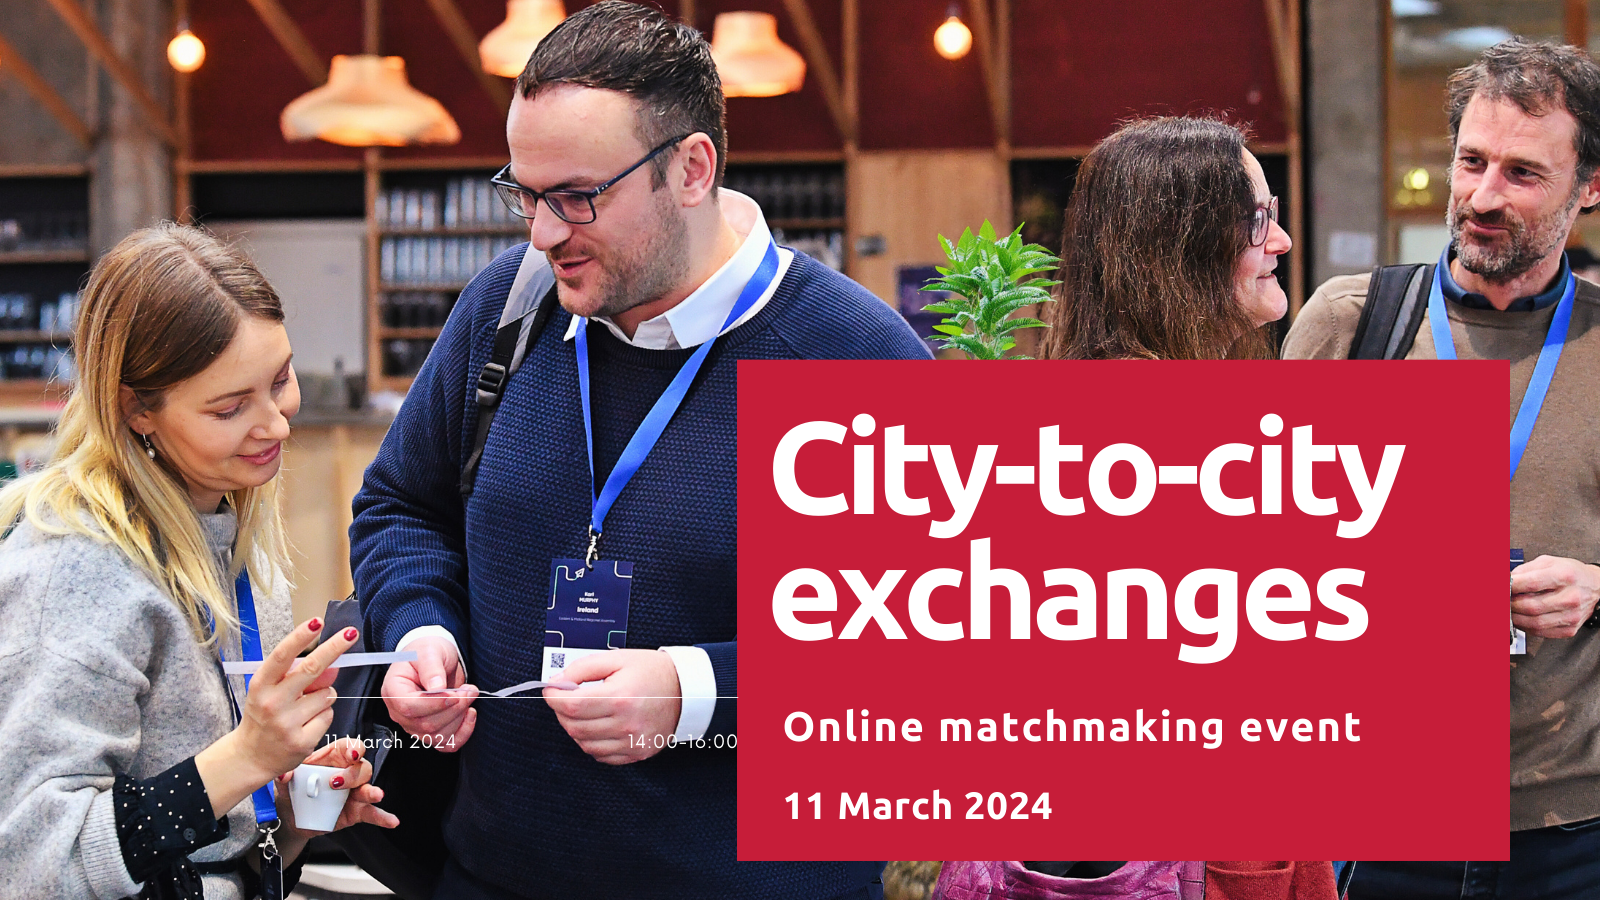 Join the City-to-City Exchanges: online matchmaking event on 11 March 2024, 14:00-16:00